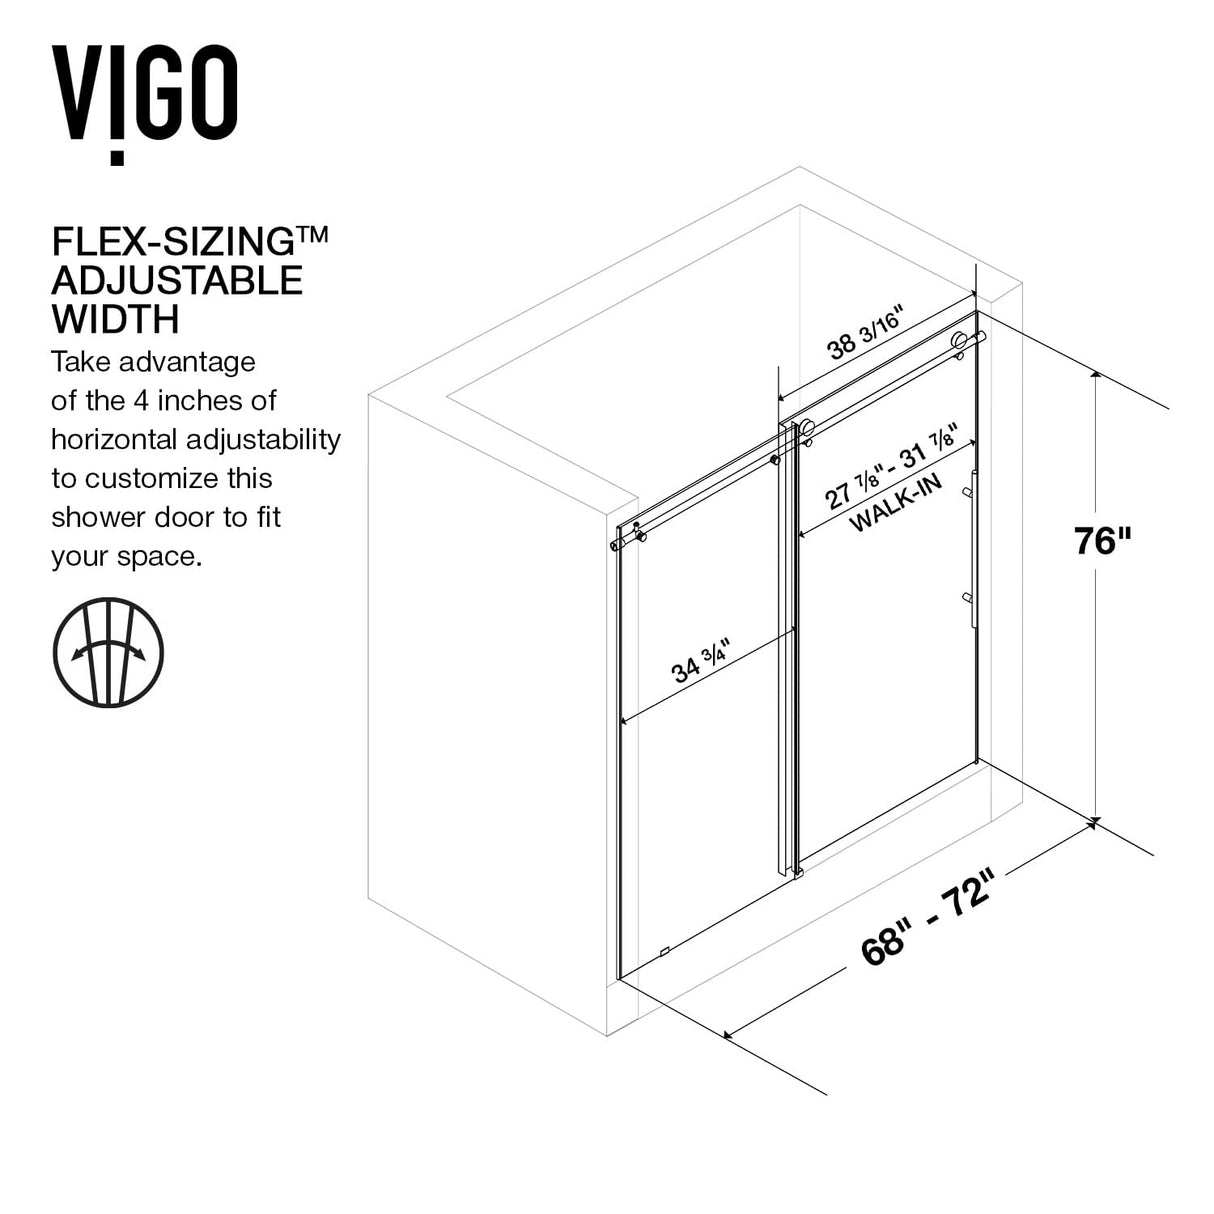 VIGO Adjustable 68-72" W x 76" H Elan E-Class Frameless Sliding Rectangle Shower Door with Clear Tempered Glass, Reversible Door Handle and Stainless Steel Hardware in Matte Black-VG6021MBCL7276